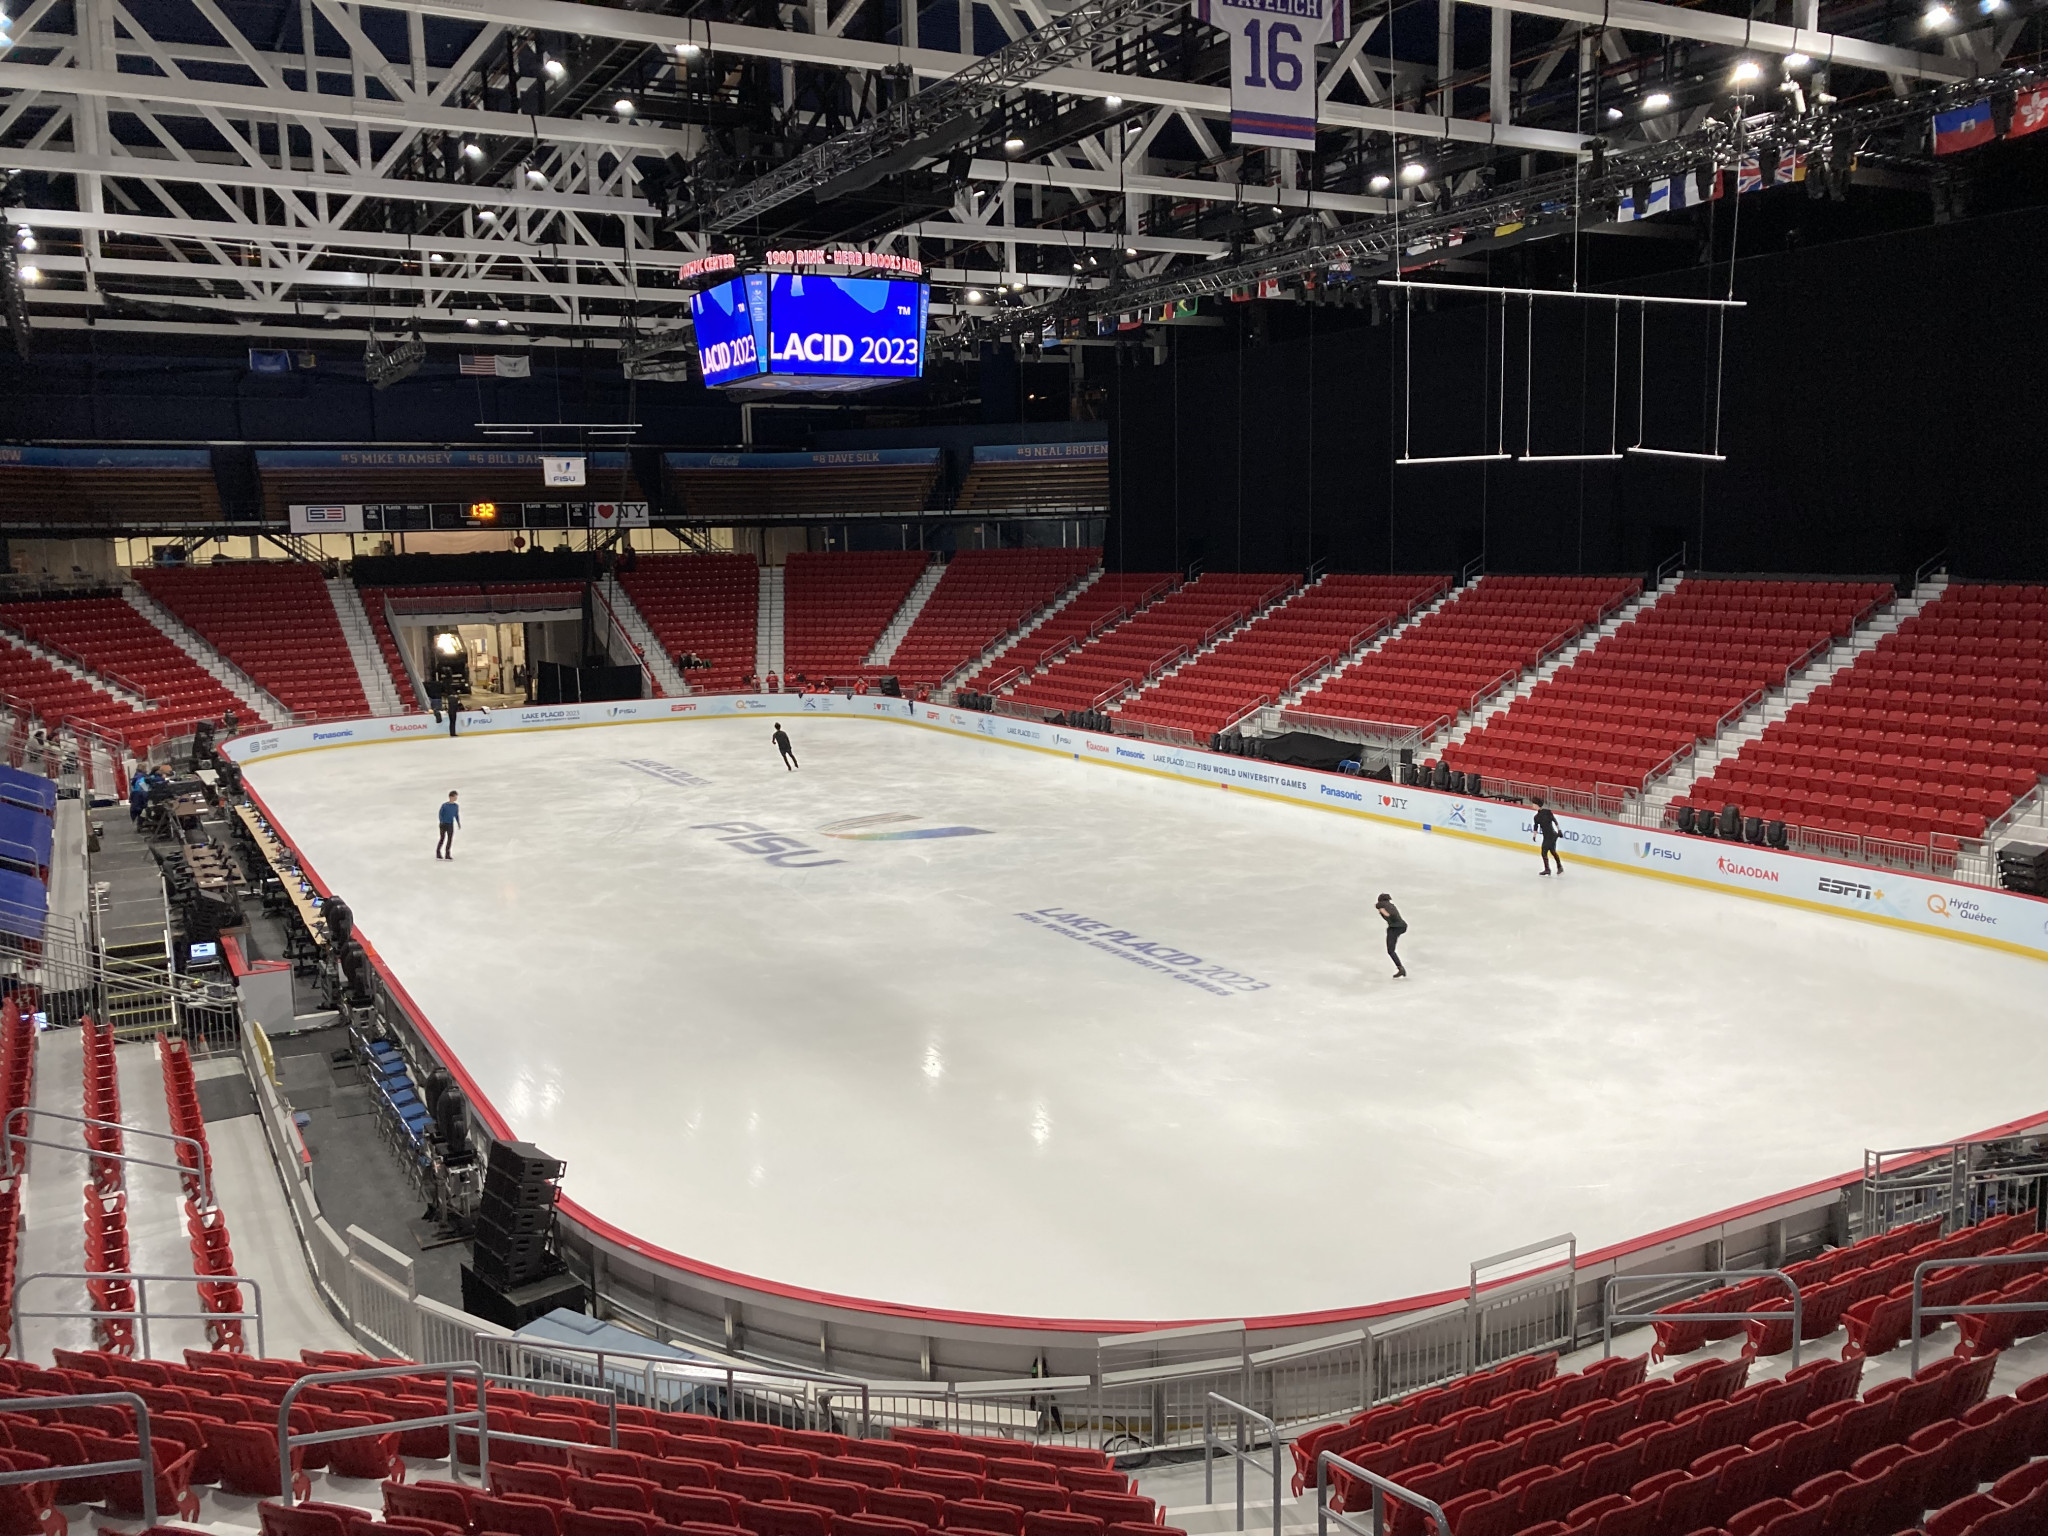 The media venue tour started with a visit to the Herb Brooks Arena that is set to stage the Opening and Closing Ceremonies ©ITG